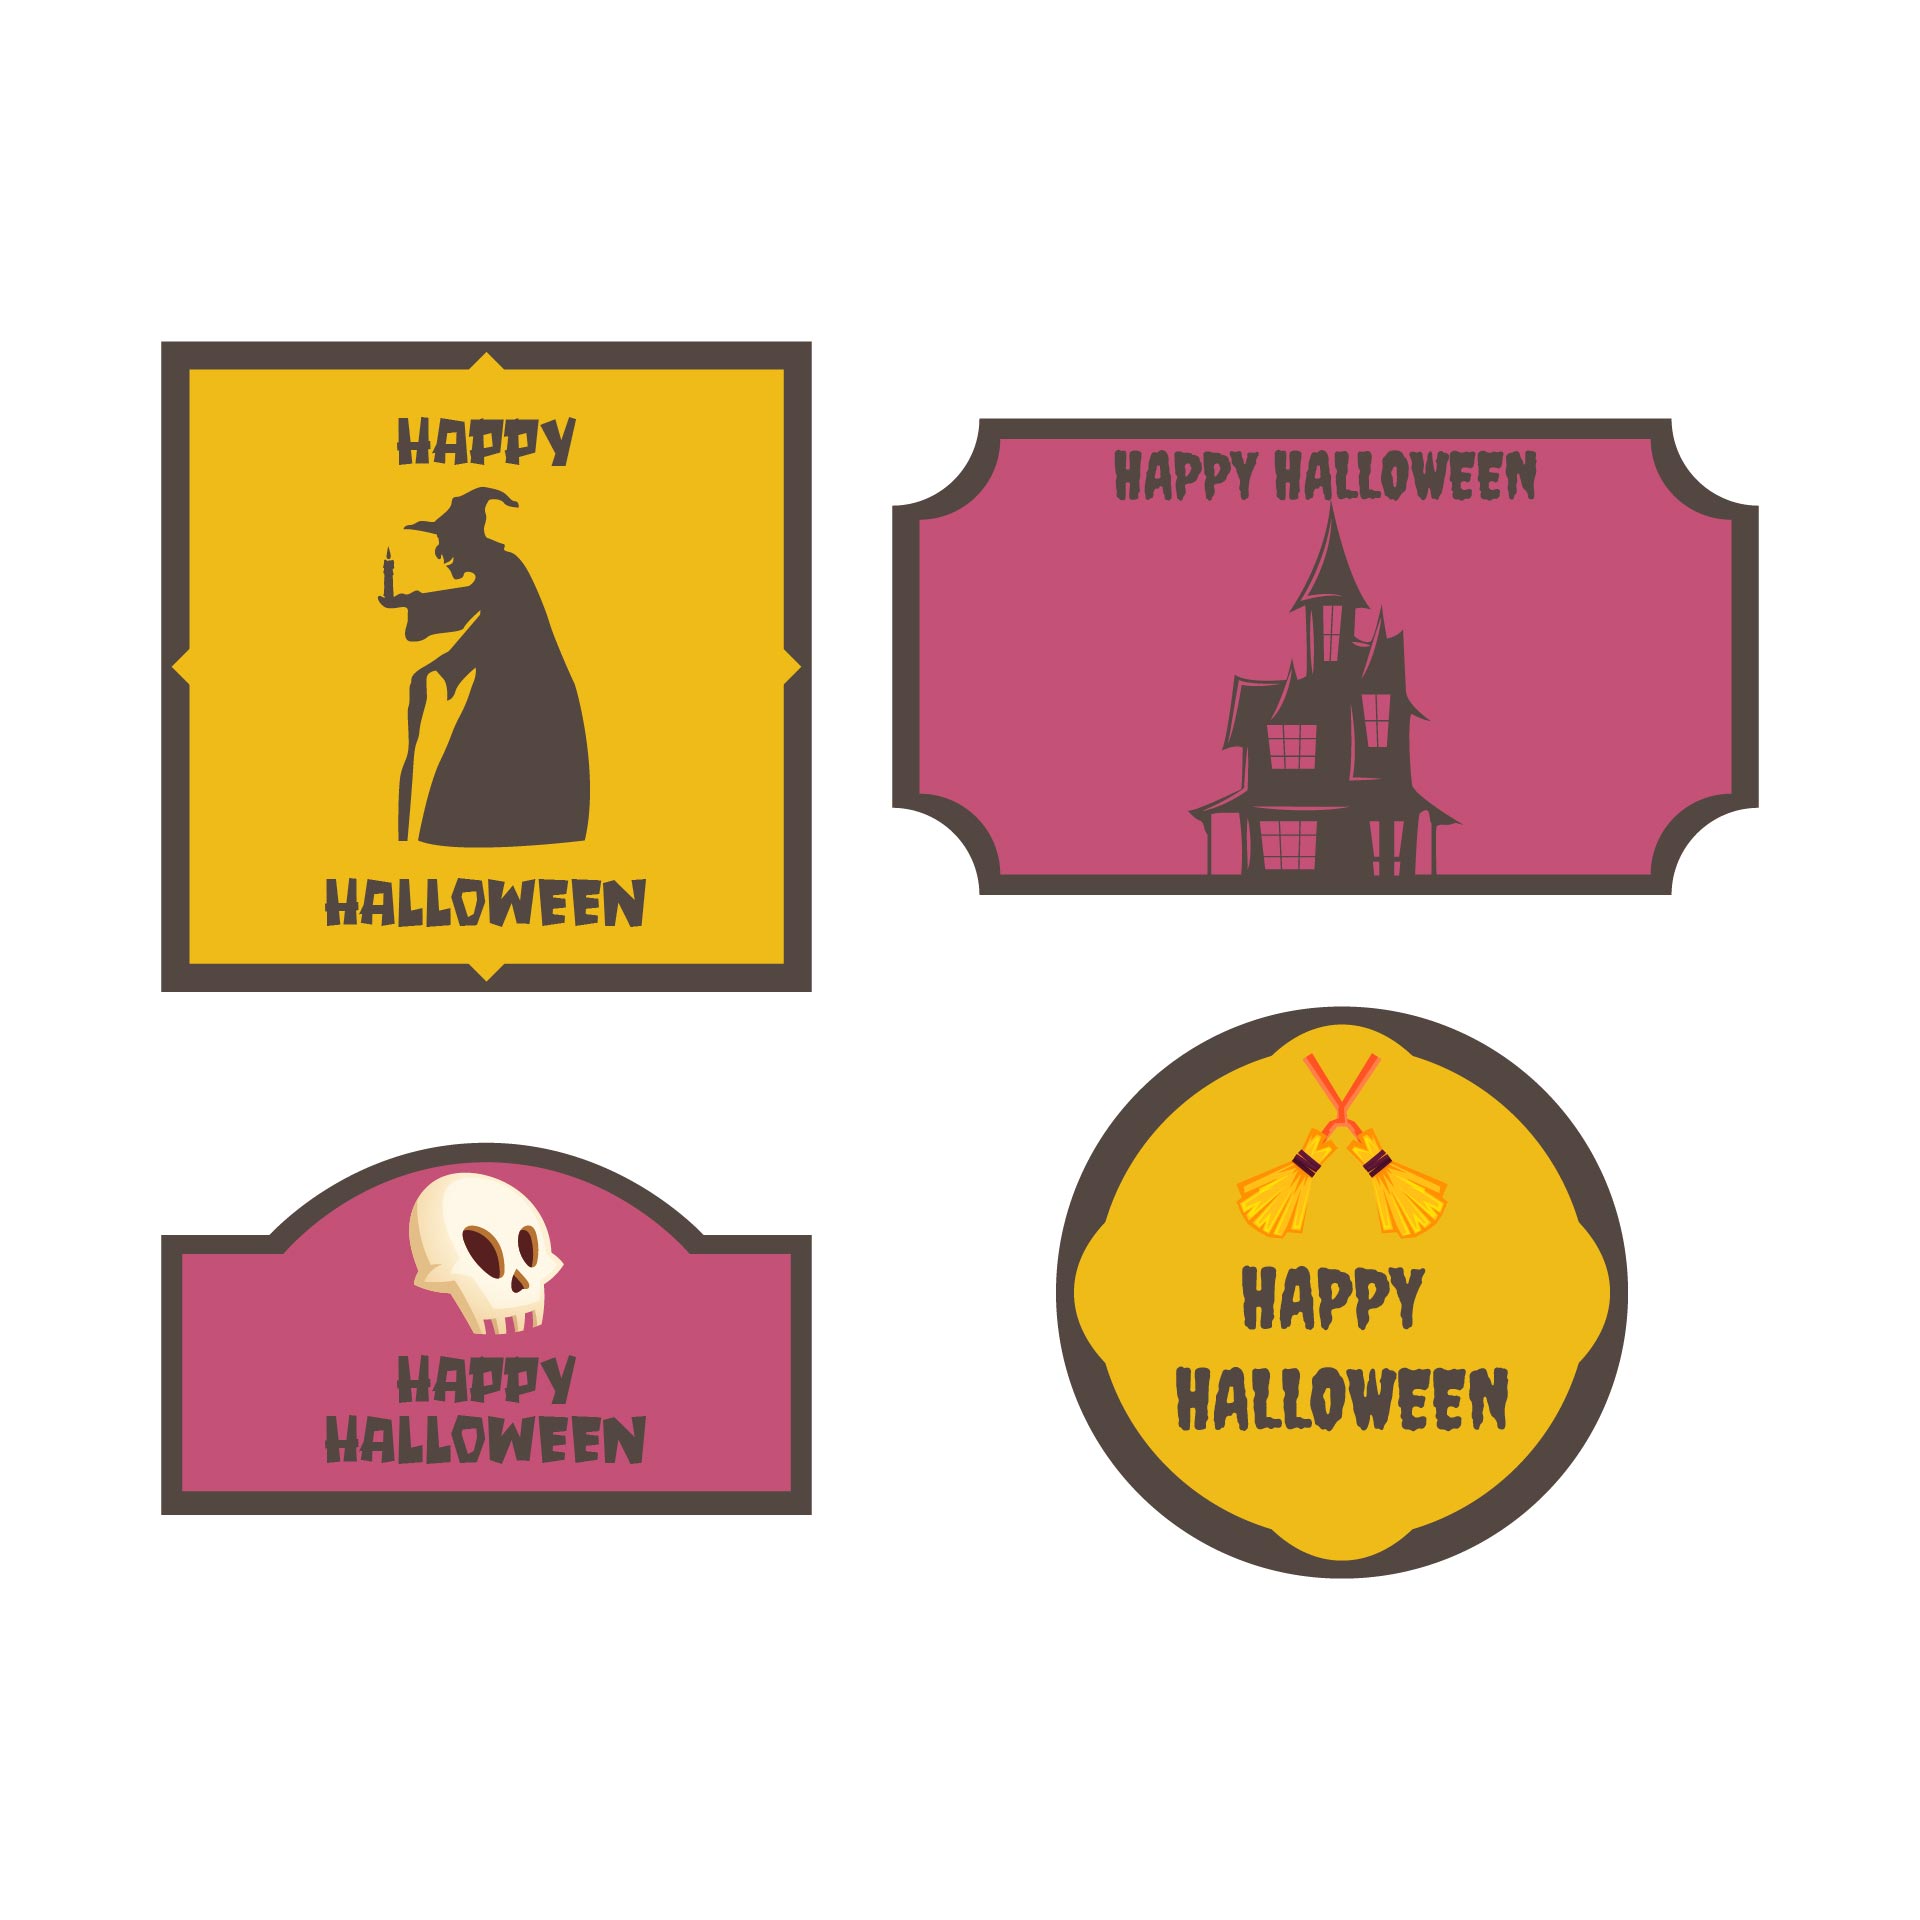 9 Best Images Of Personalized Gift Free Printable Halloween Tags 